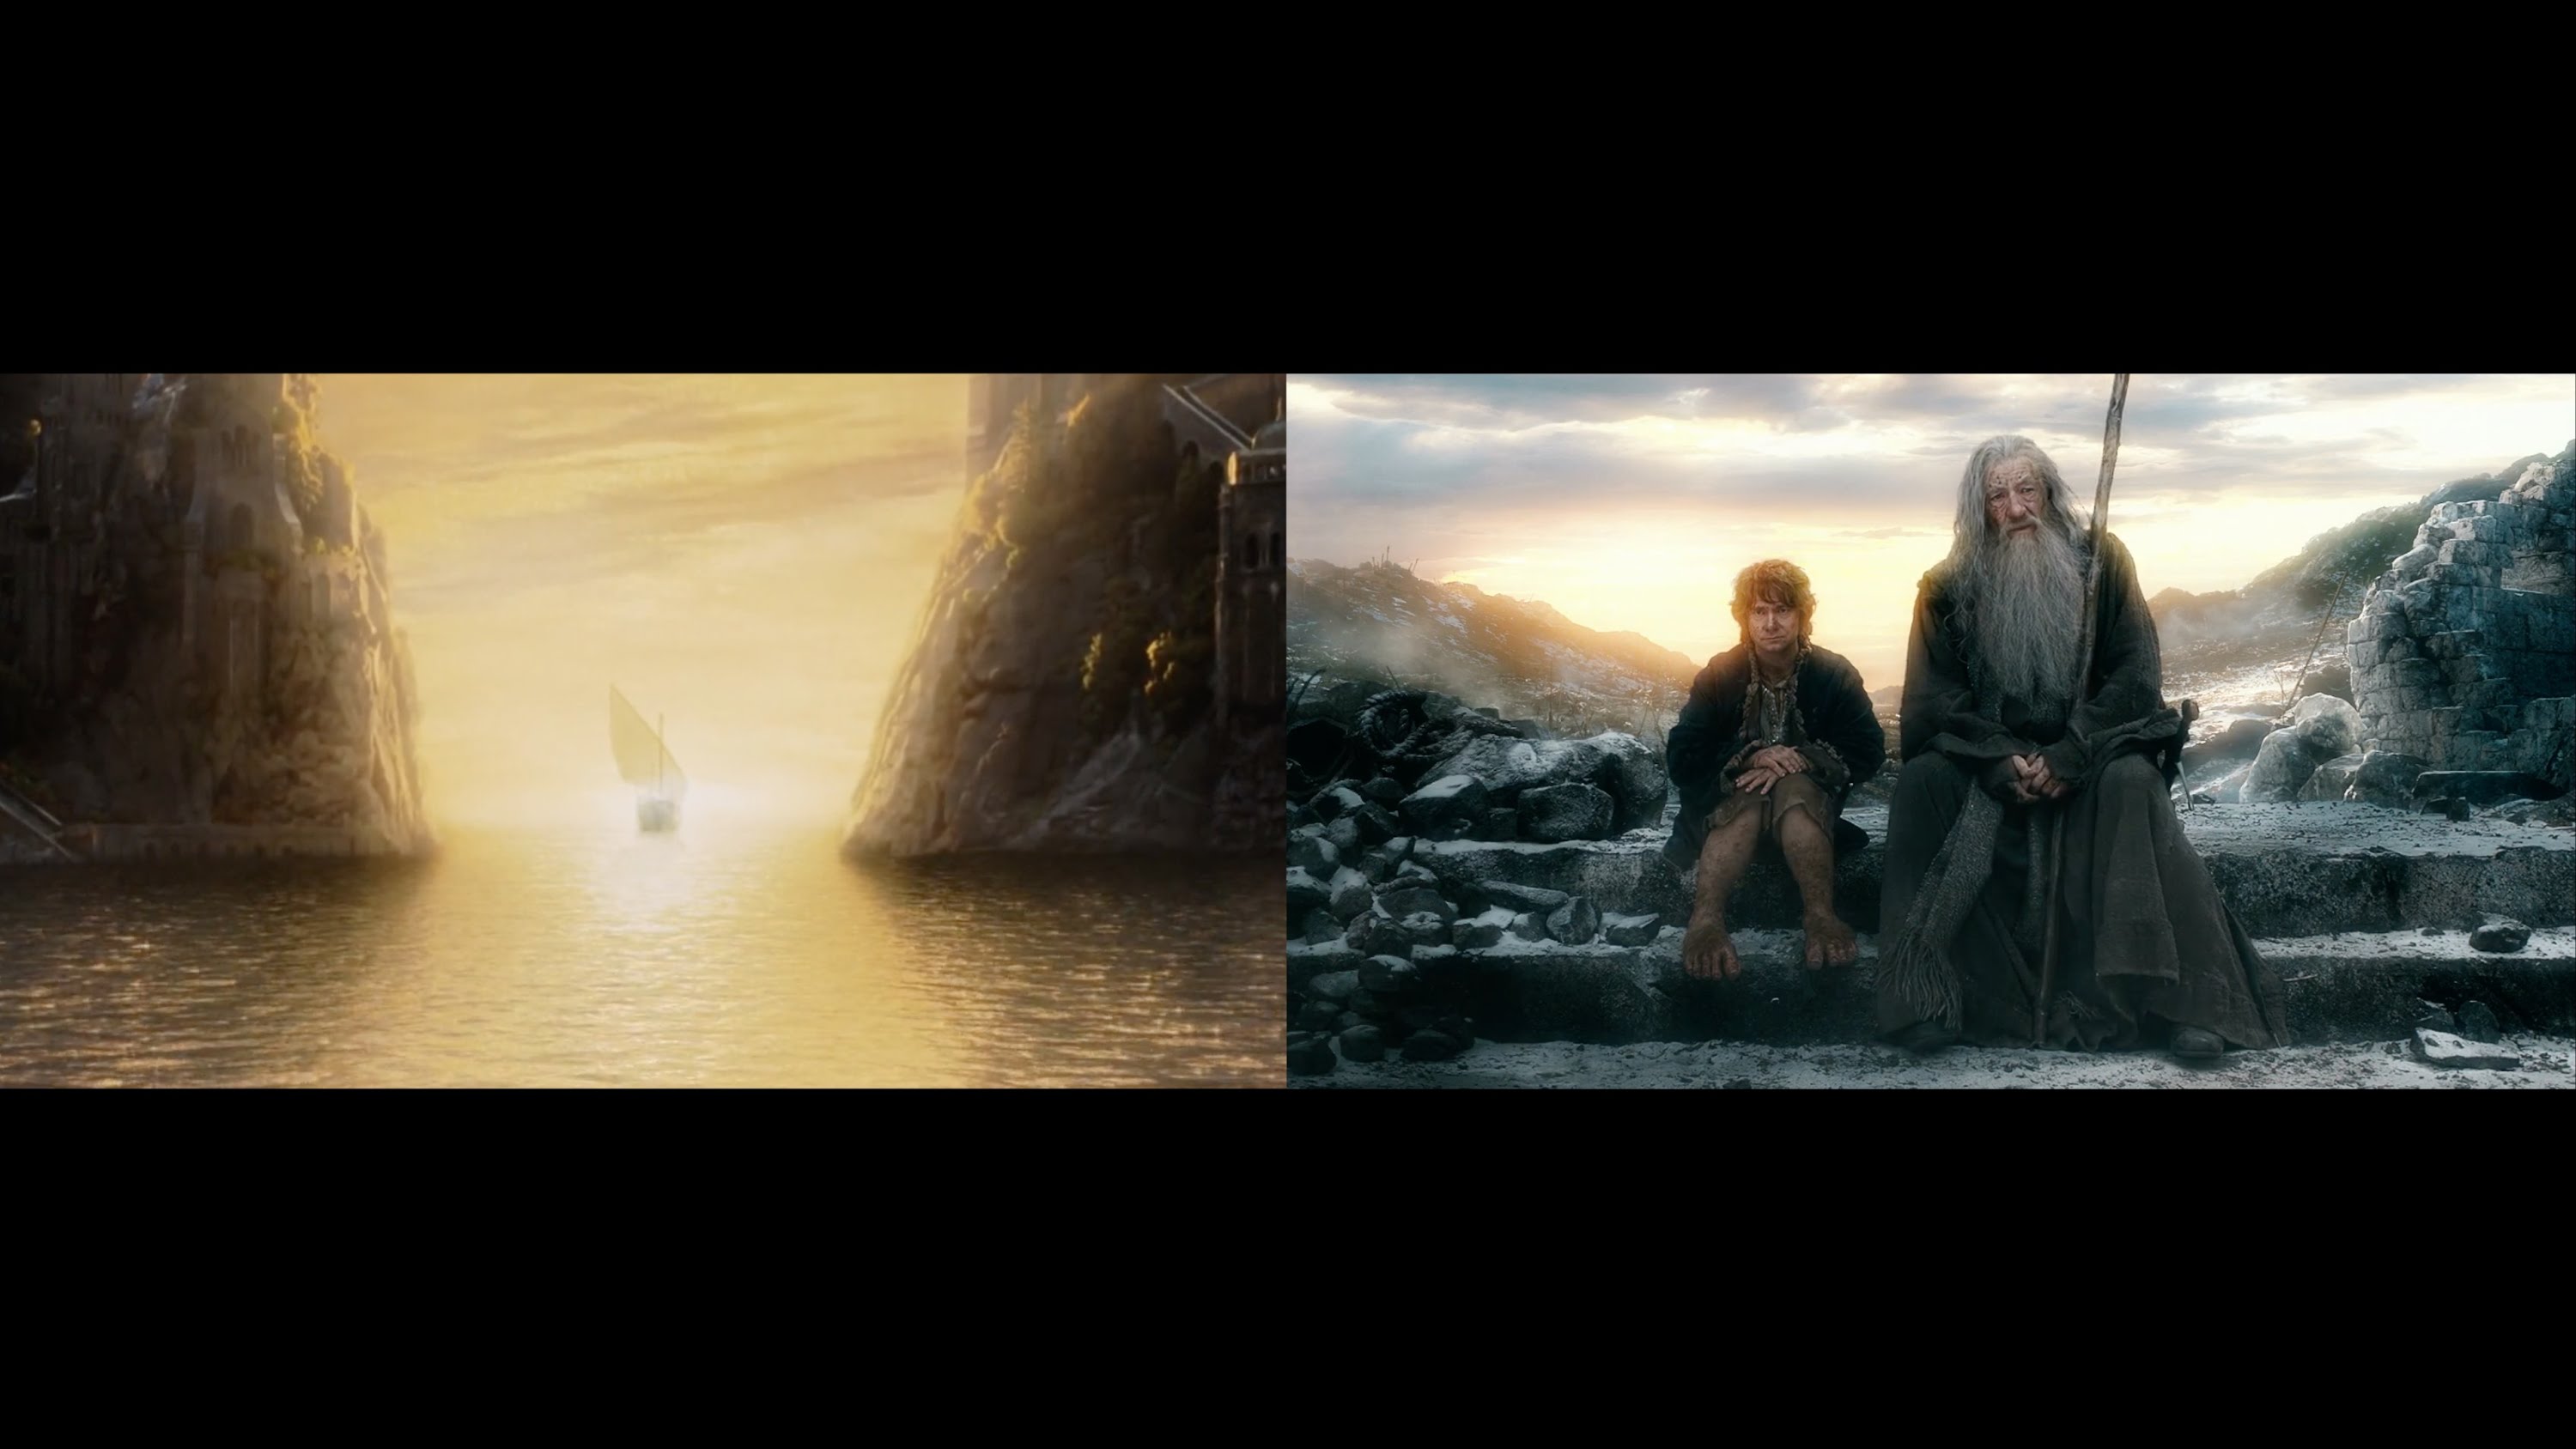 A Tribute 'The Lord of the Rings' and 'The Hobbit' Featuring Beautiful